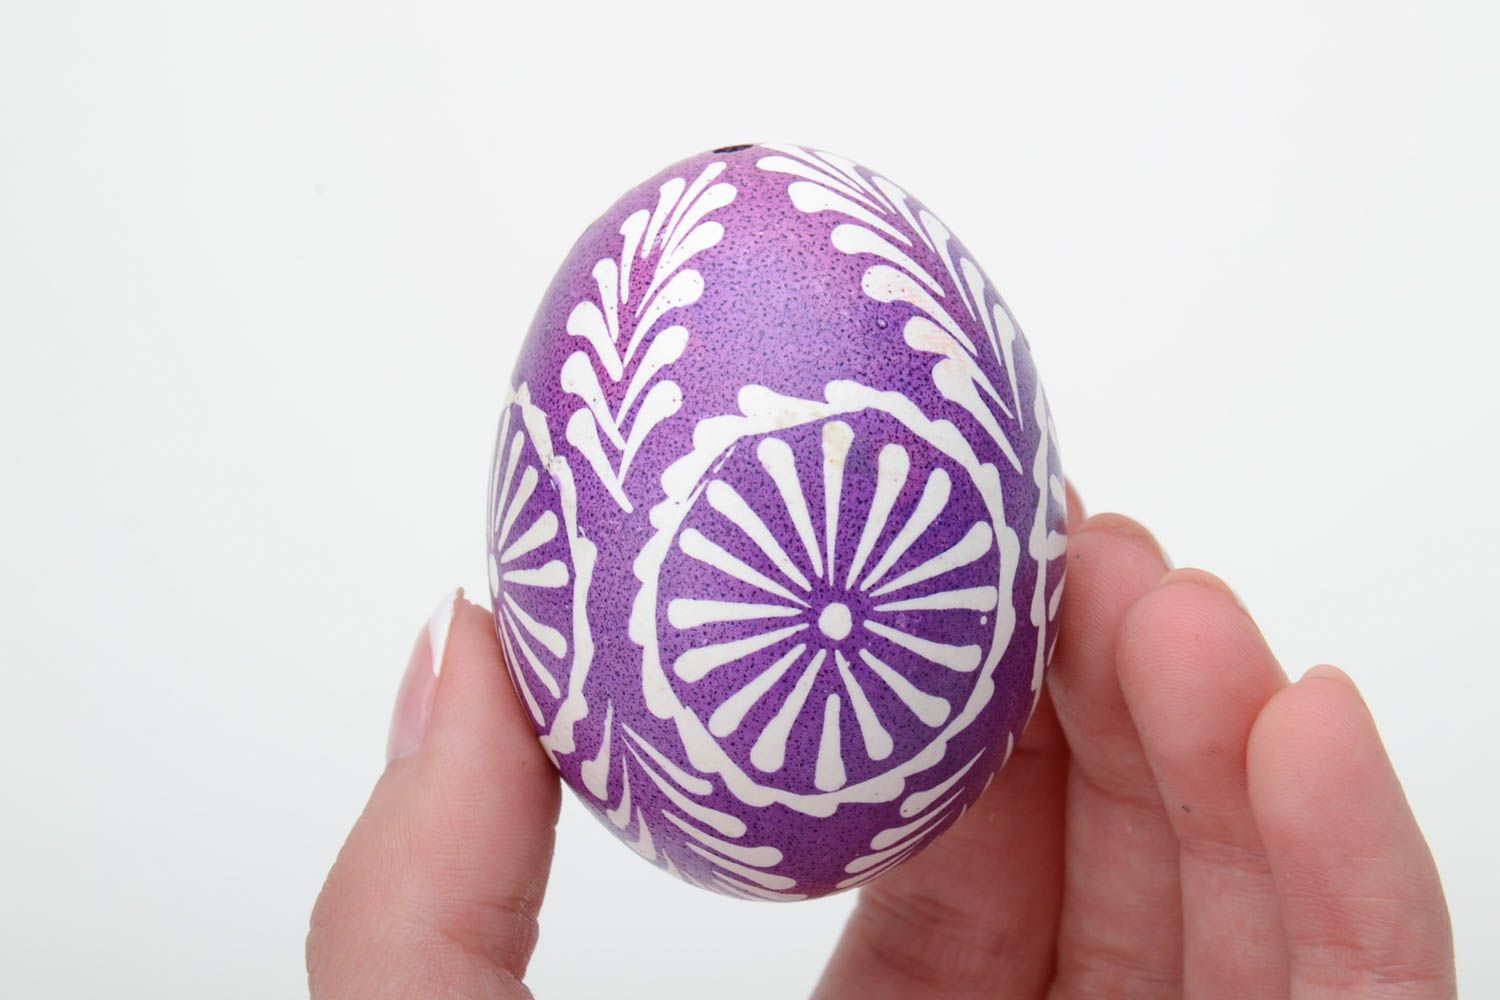 Handmade decorative violet and white Easter egg painted in Lemkiv style photo 5